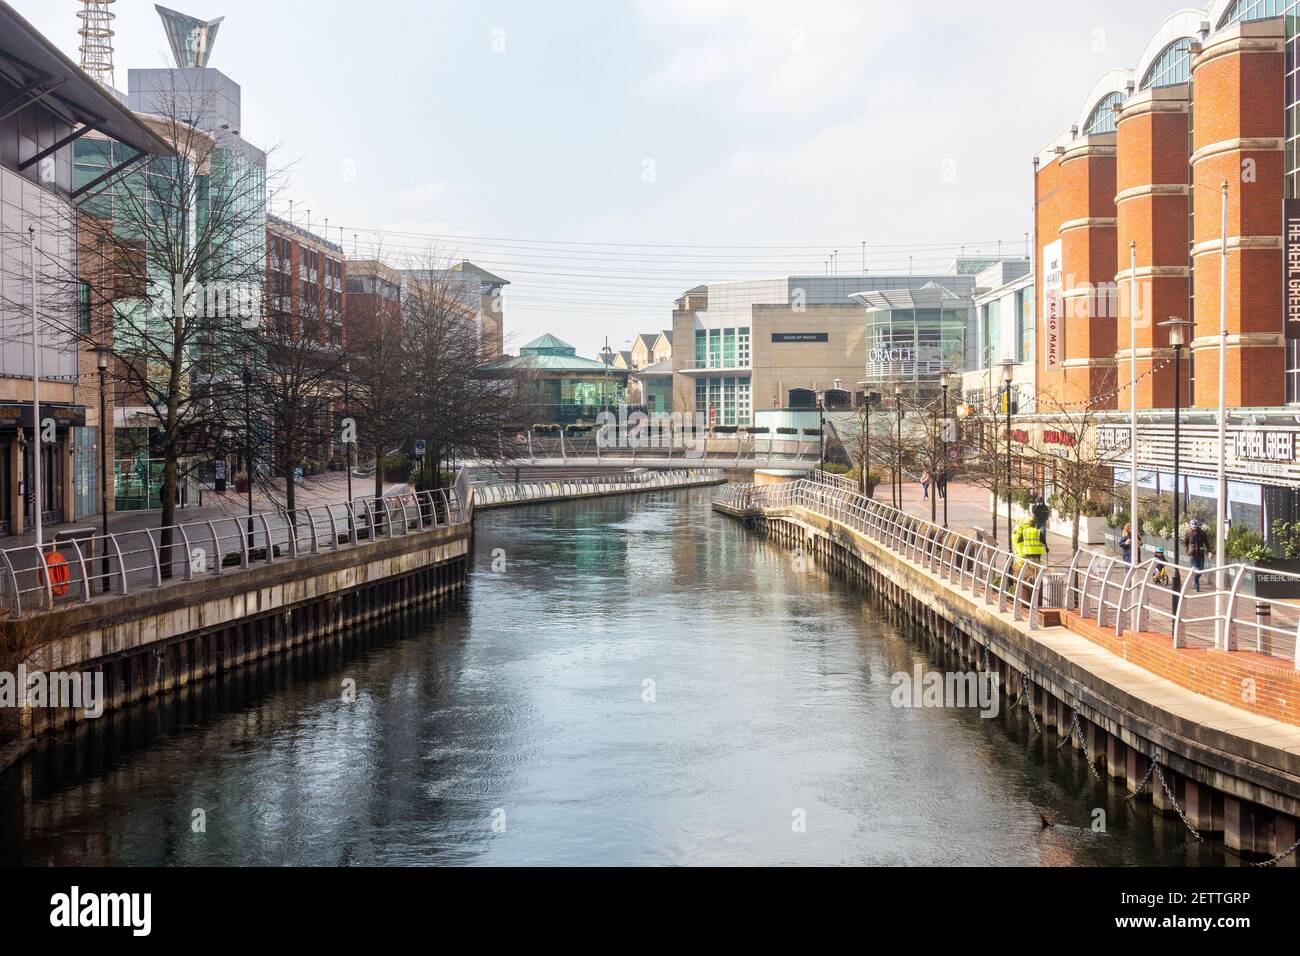 The River Kennet flows through the middle of The Oracle Shopping Centre in Reading, UK. The Riverside area is home to restaurants, cafes and a cinema. Stock Photo